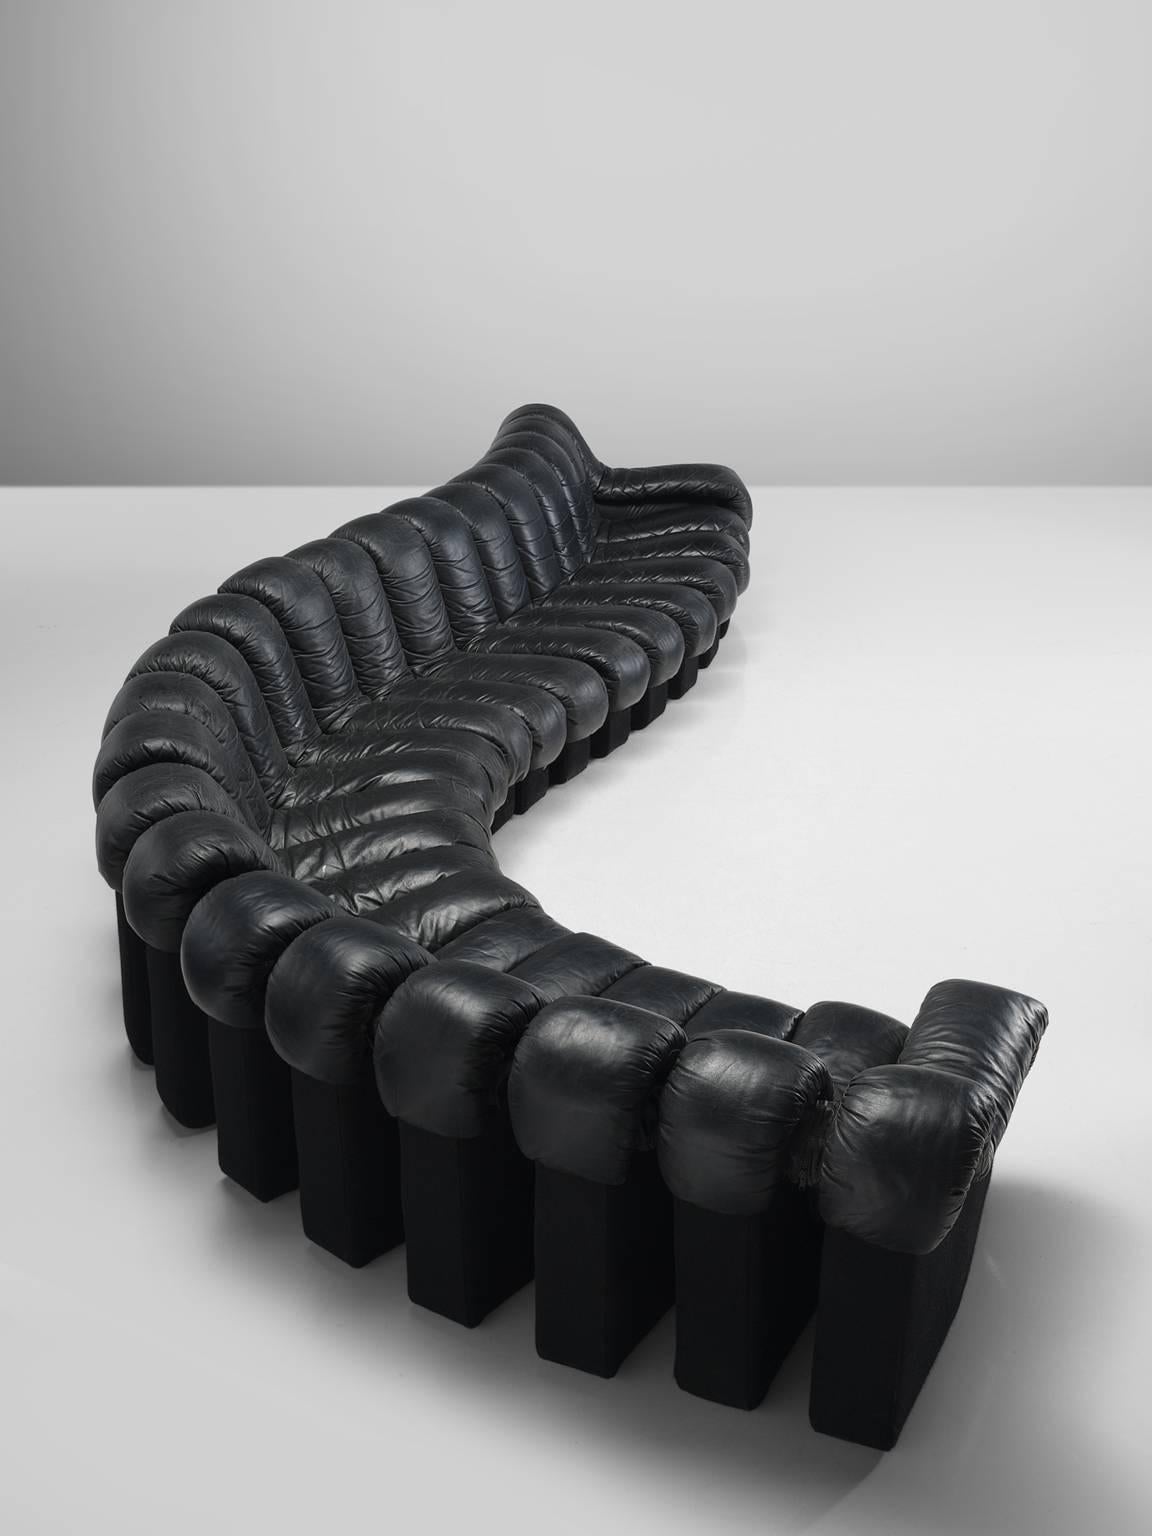 De Sede ‘Snake’ DS-600, black leather, felt, Switzerland, 1972. 

De Sede 'Non Stop' sectional sofa containing 22 pieces in original black leather, of which 20 center pieces and two armrests. Any number of pieces can be zipped together ensuring an